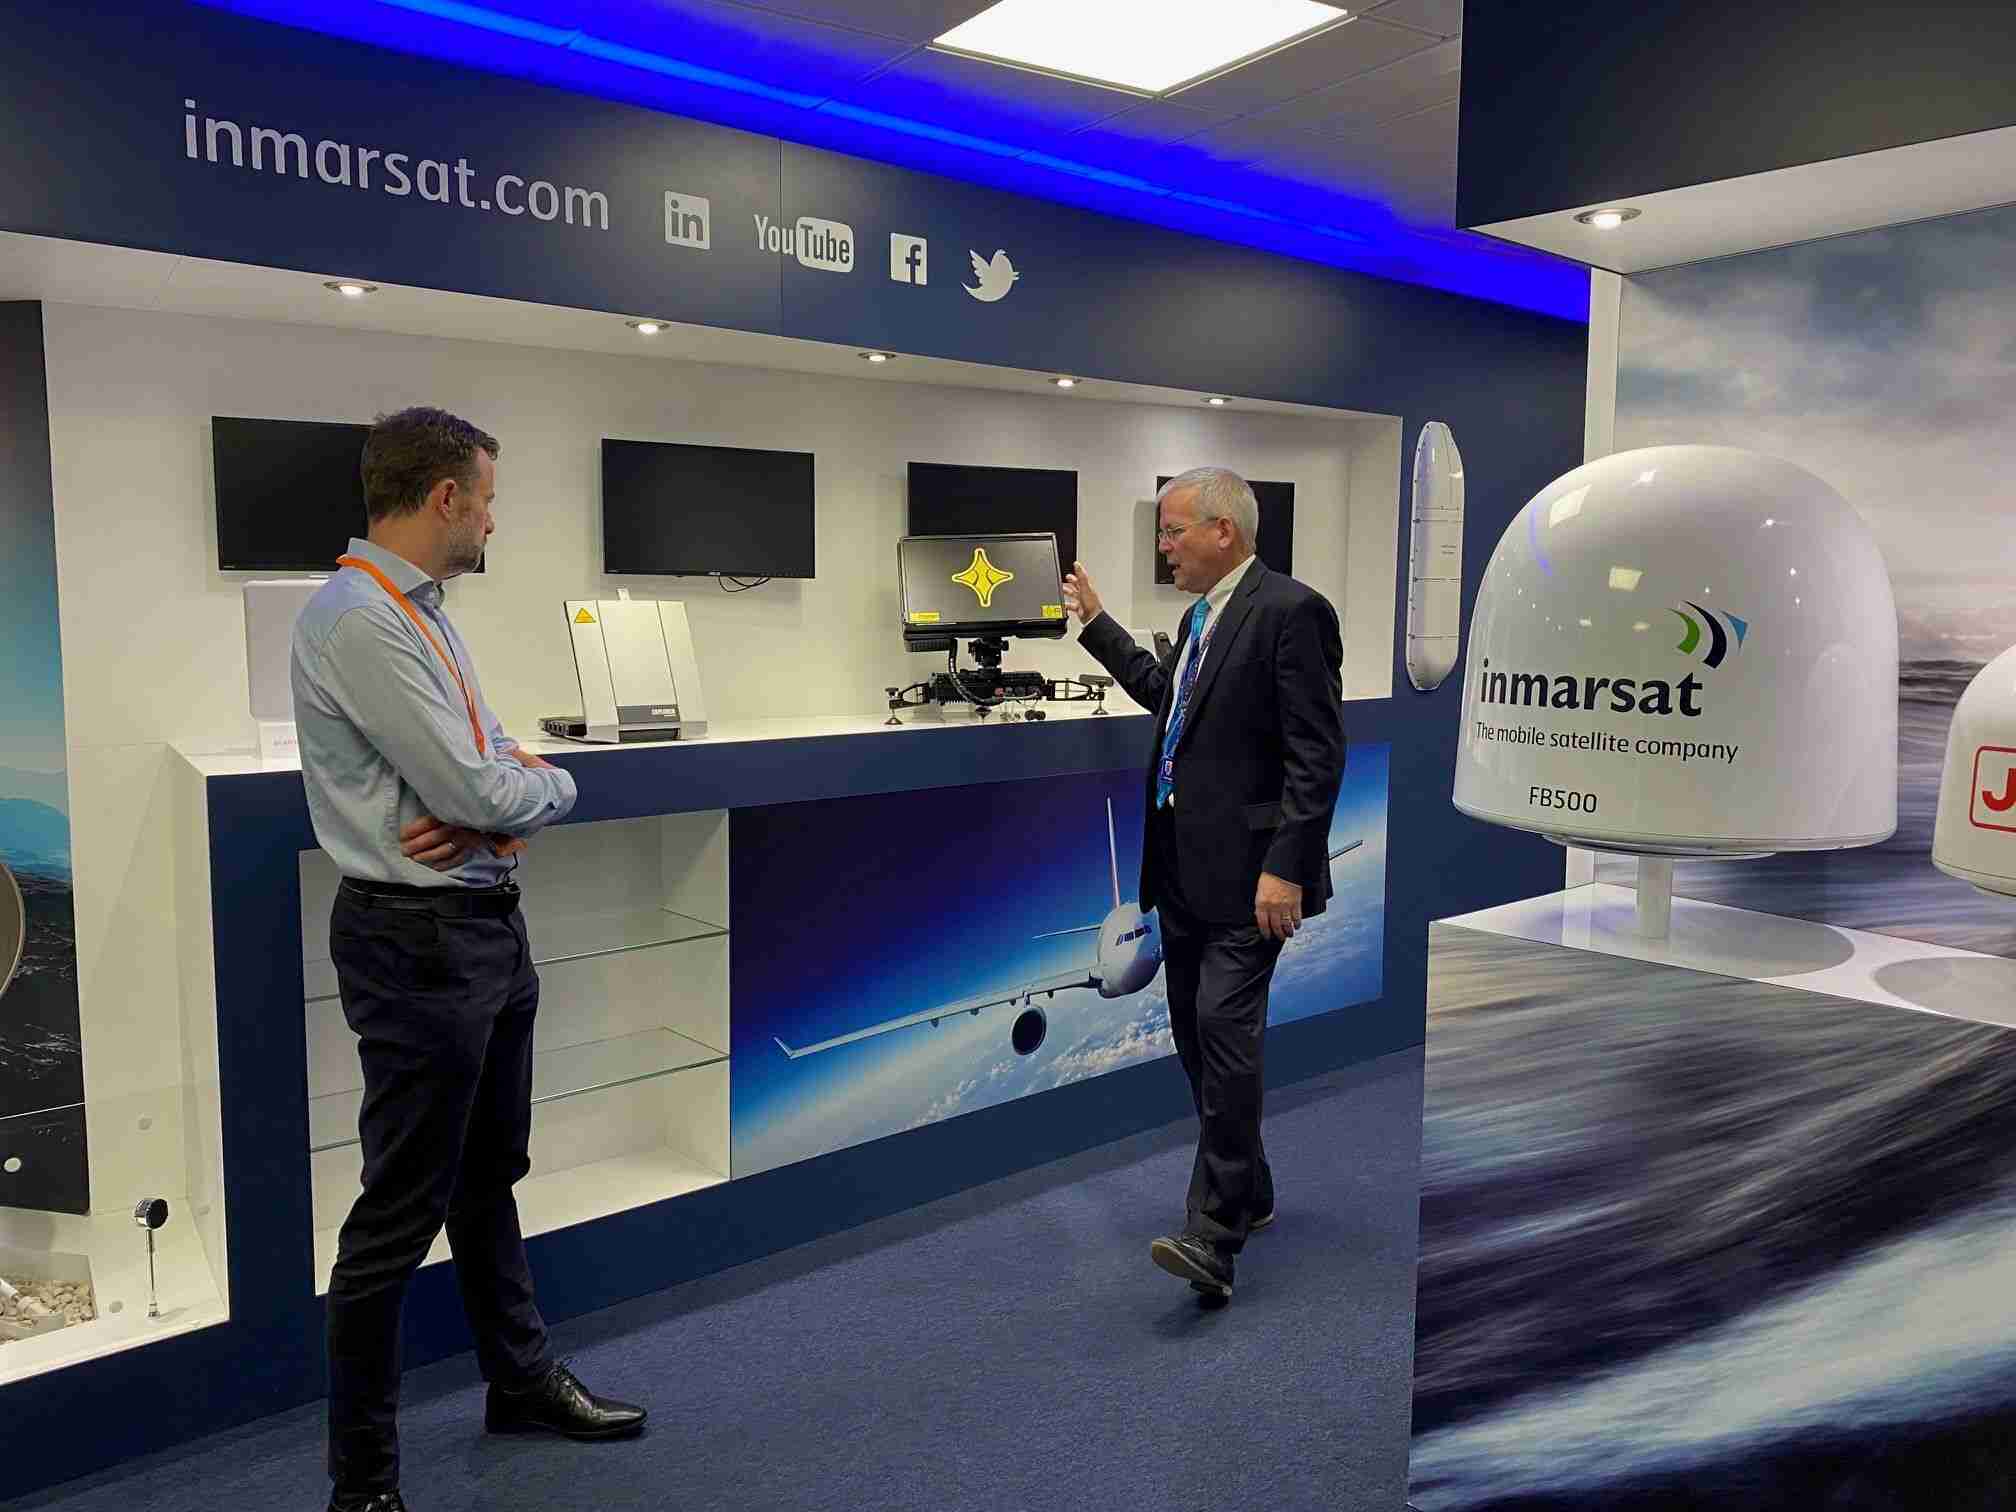 Inmarsat introduces new solution in Middle East